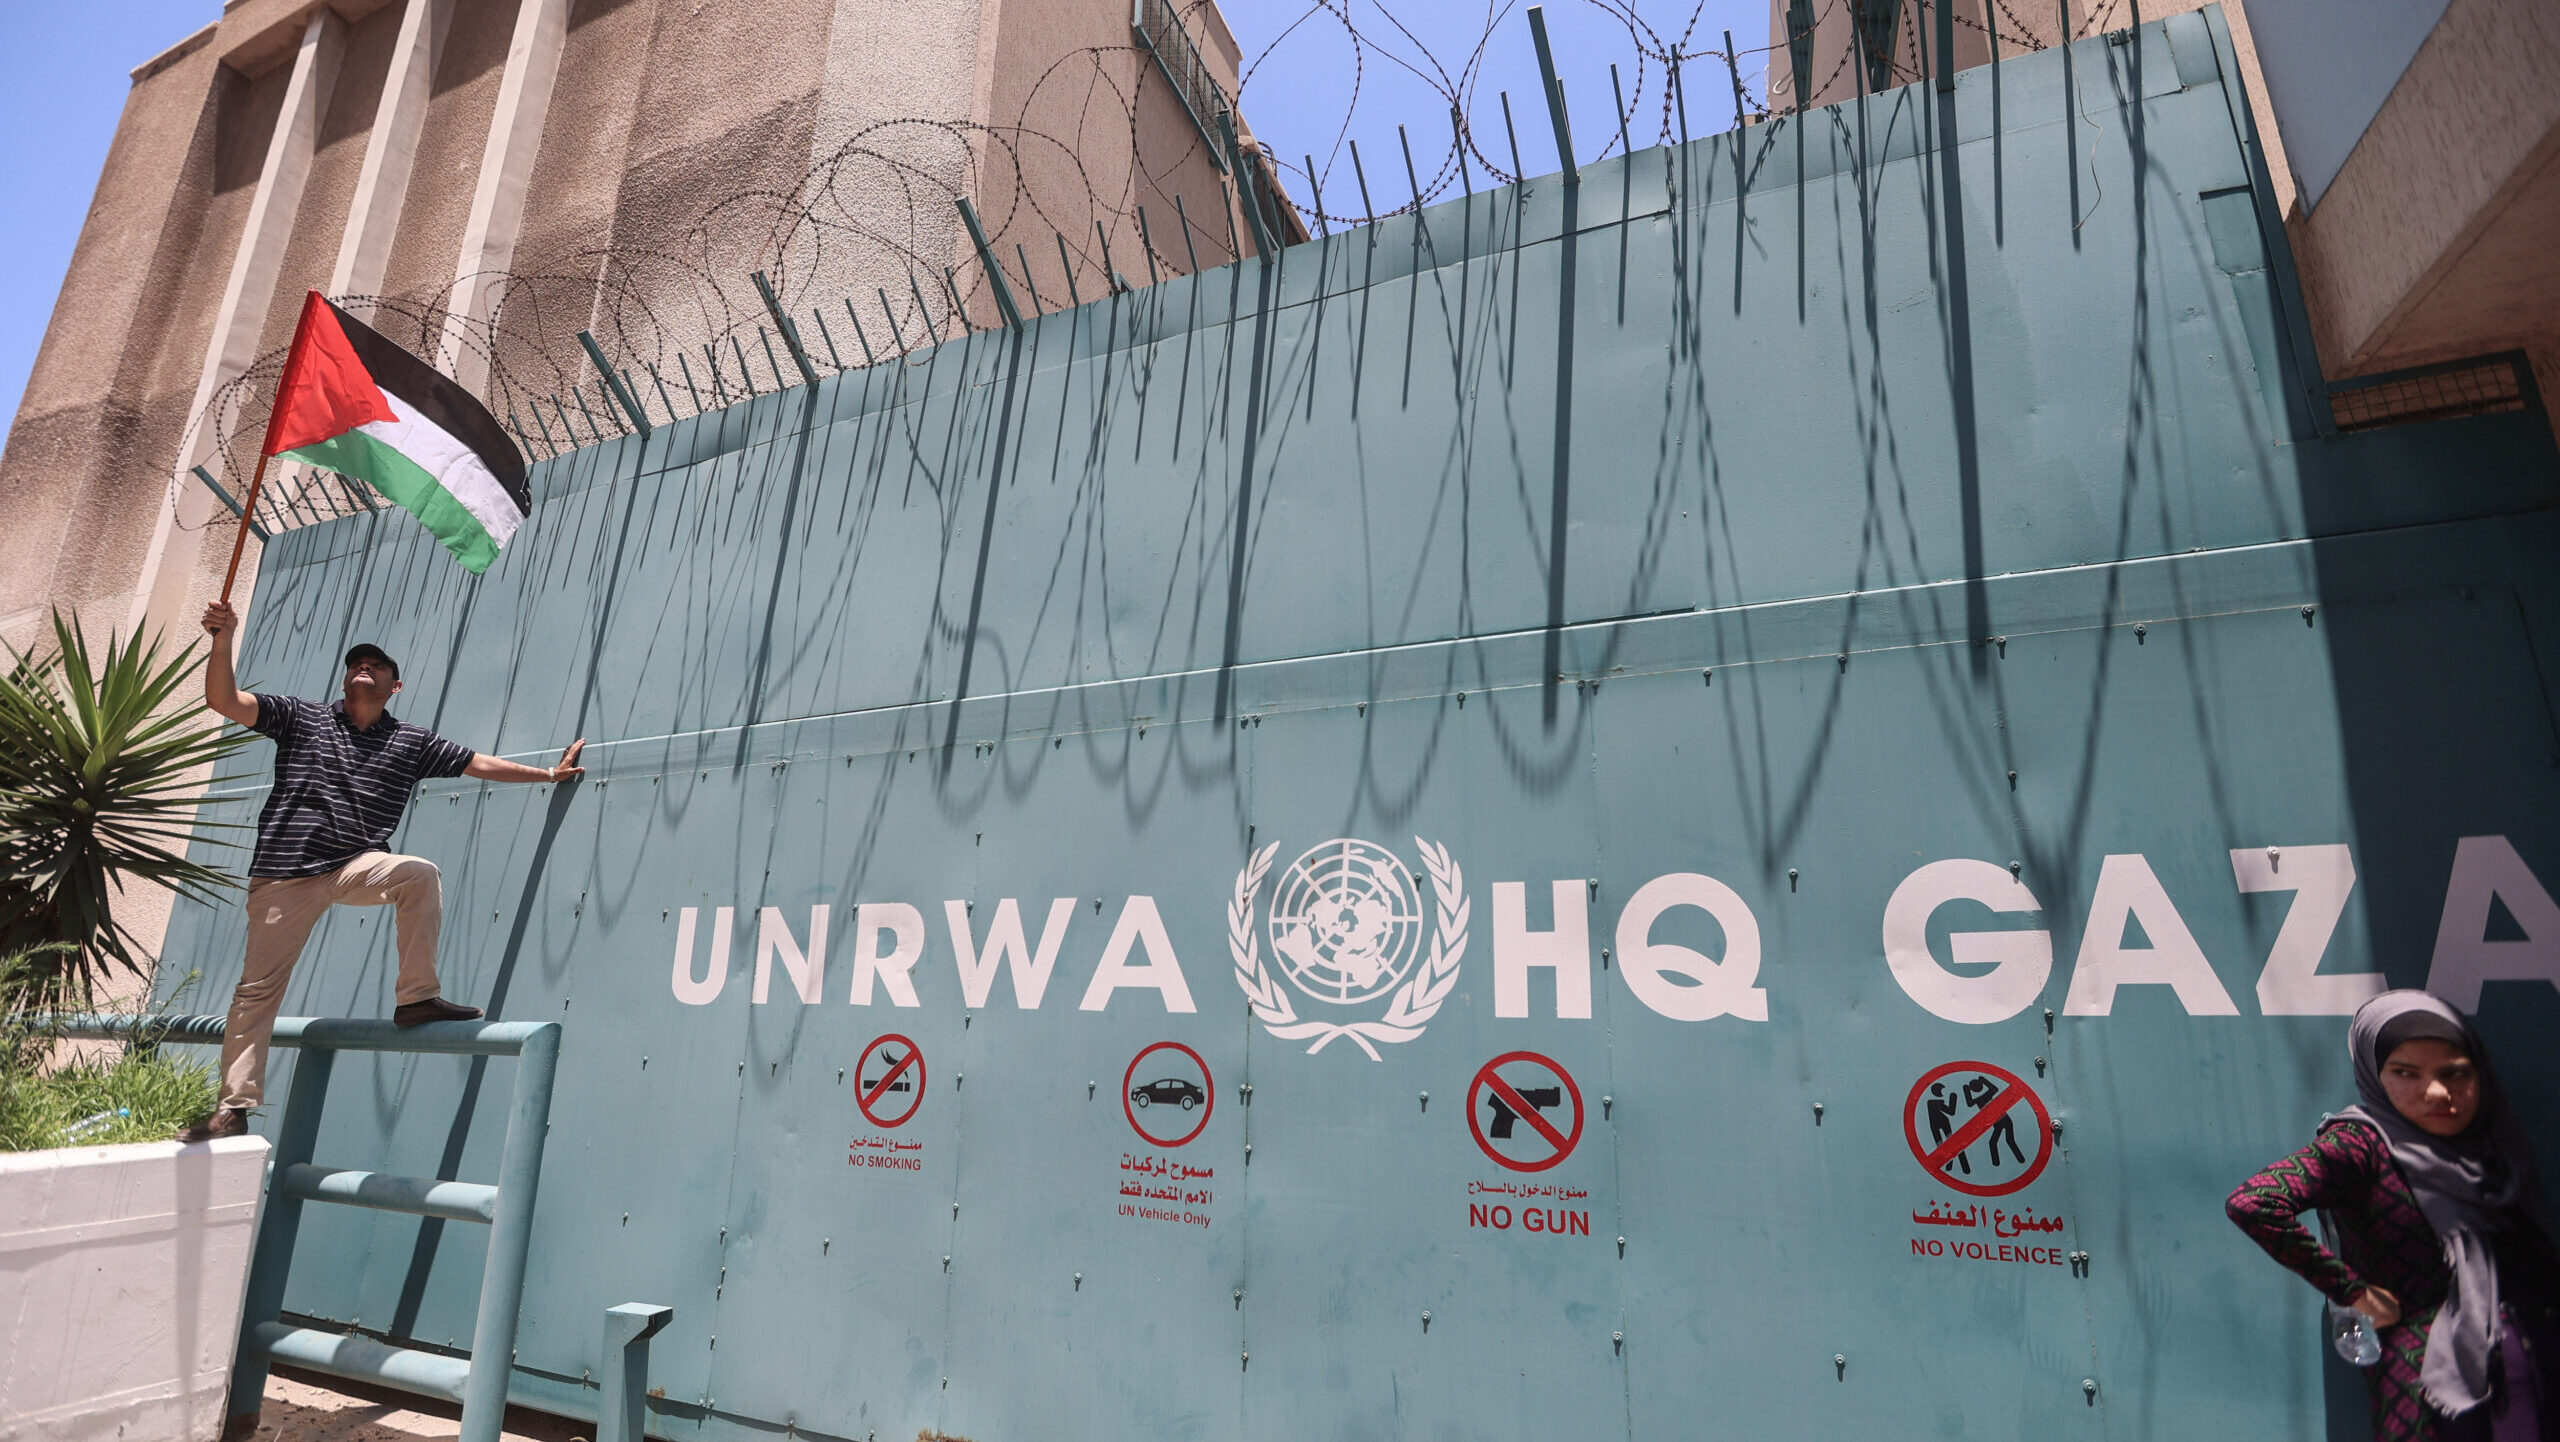 UNRWA Staff Allegedly Coerced by Israel To Falsify Hamas Links, Says Report